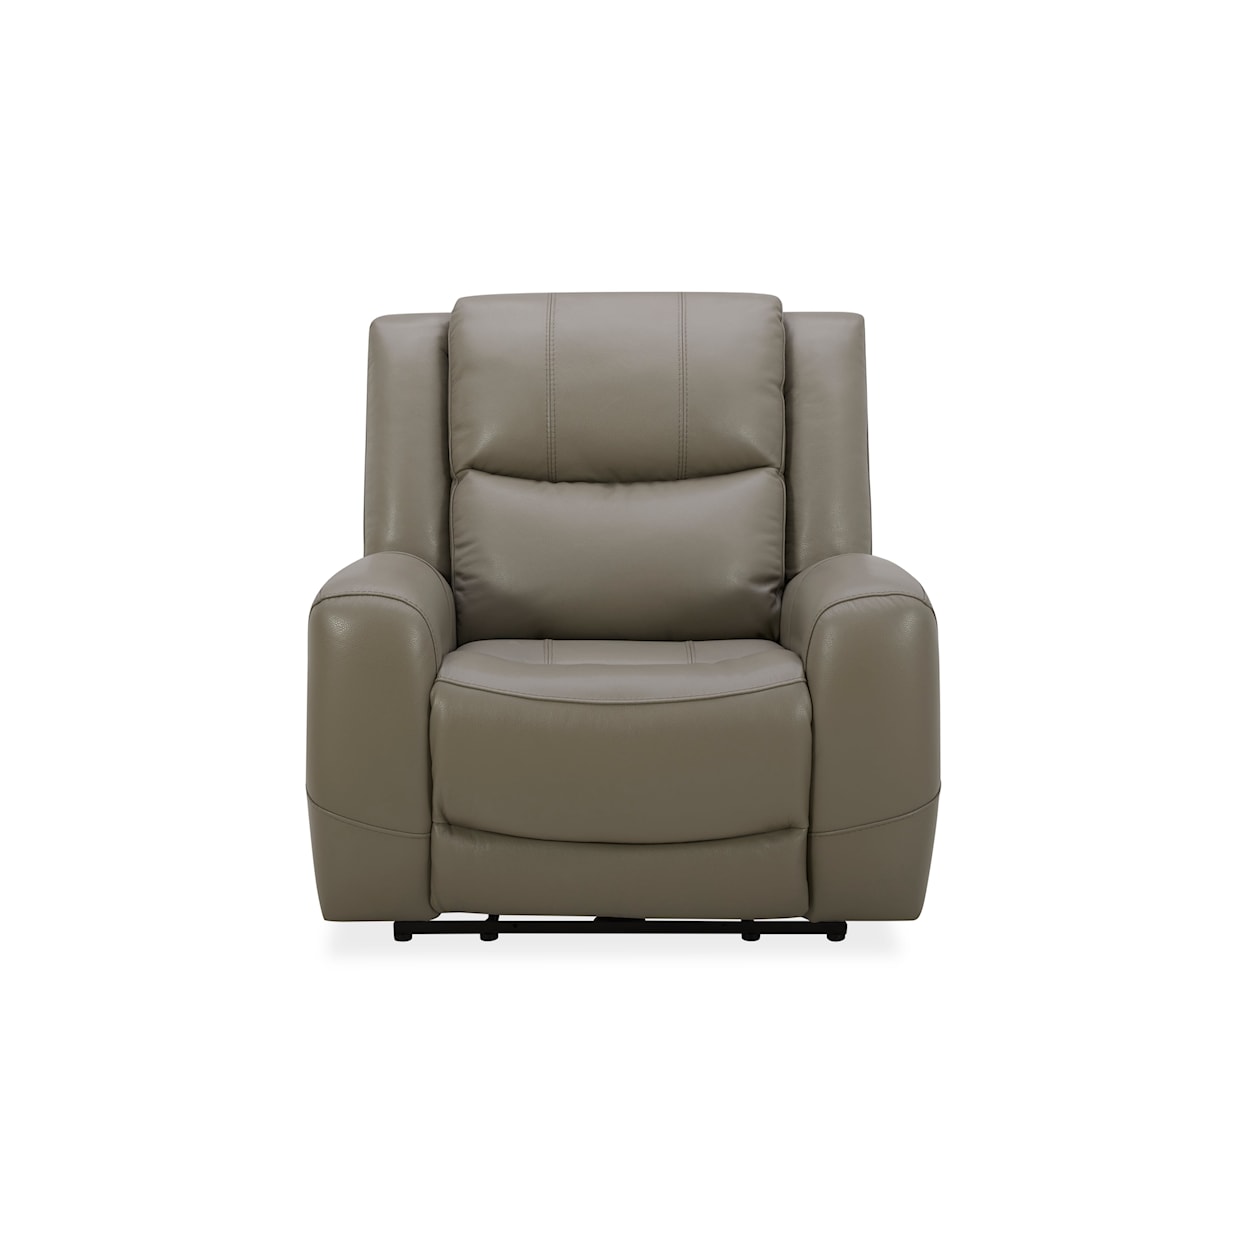 Kuka Home 6228 Leather Collection 6228 Dual Power Gray Leather Recliner